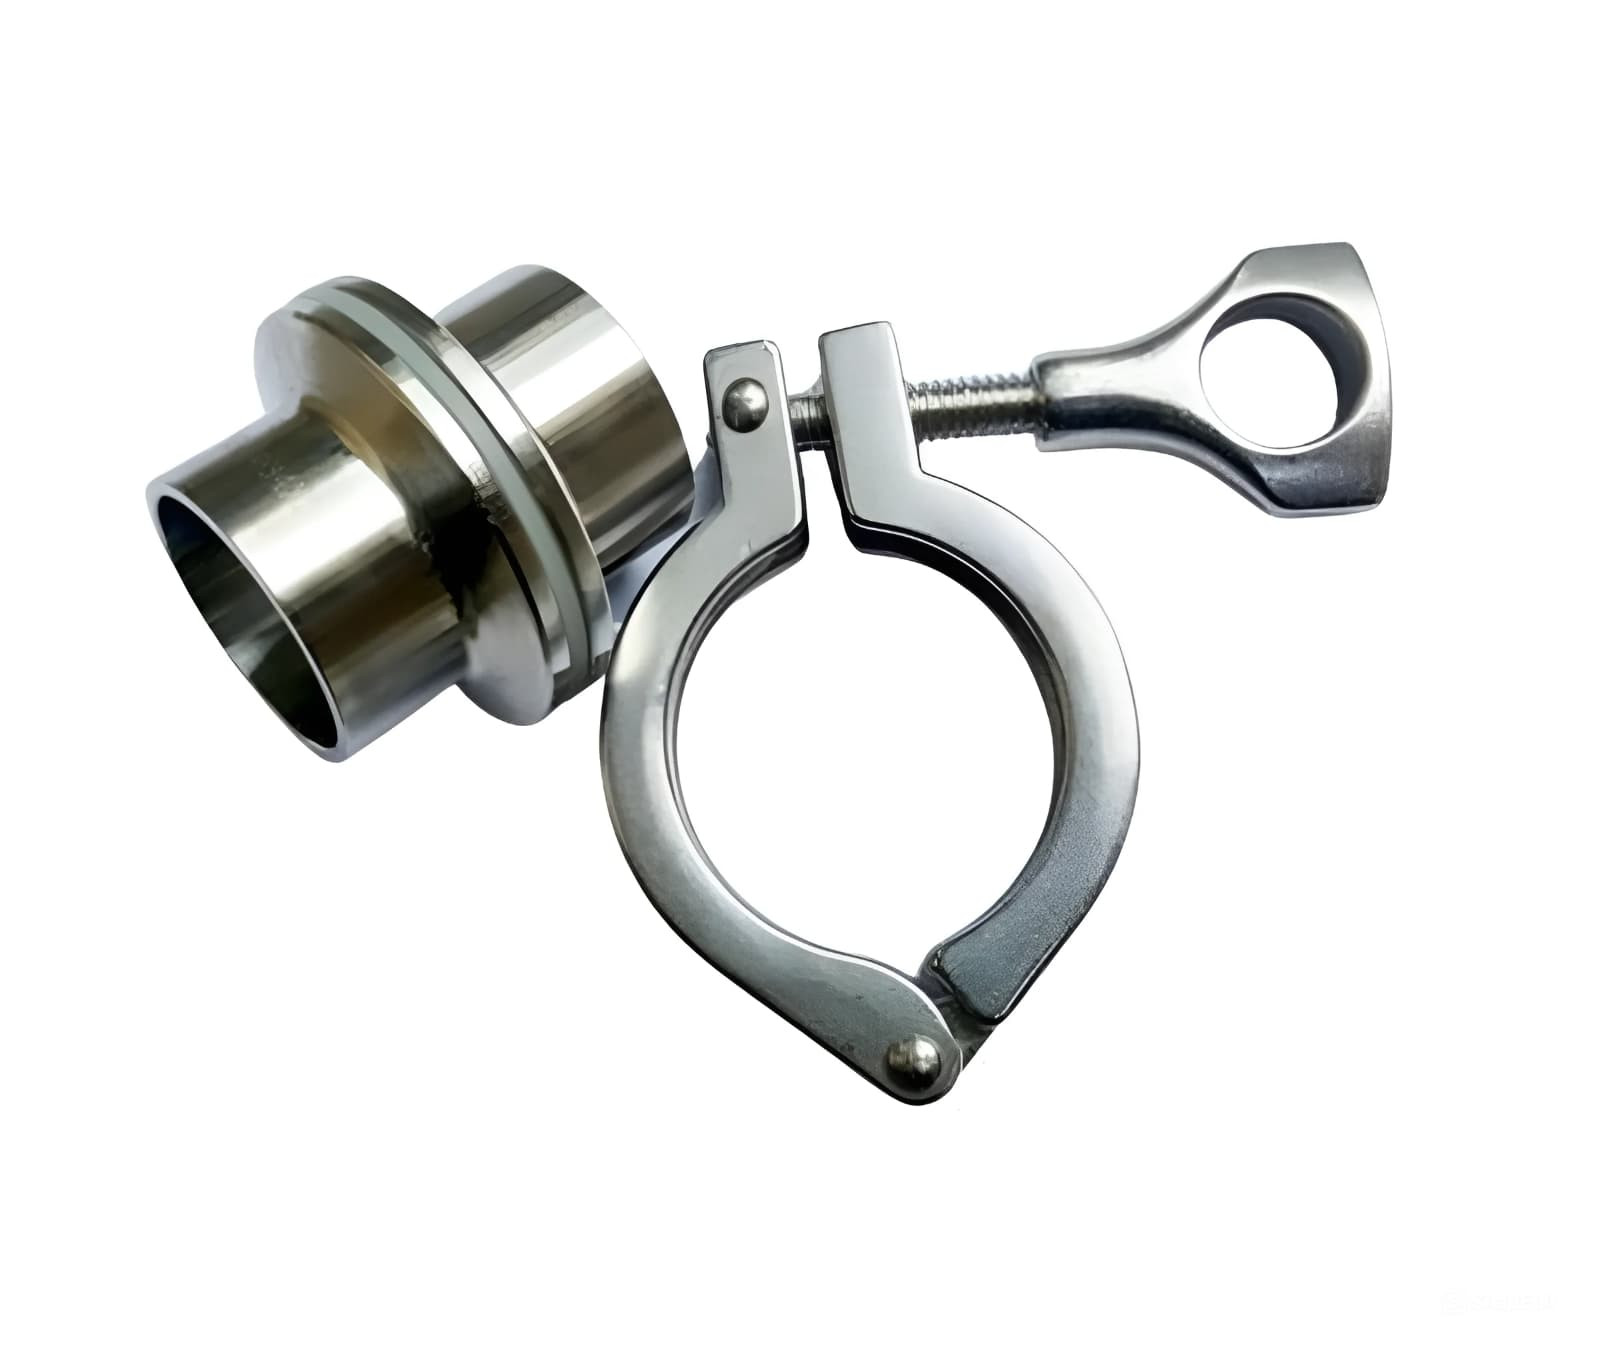 Thiết kế của Clamp